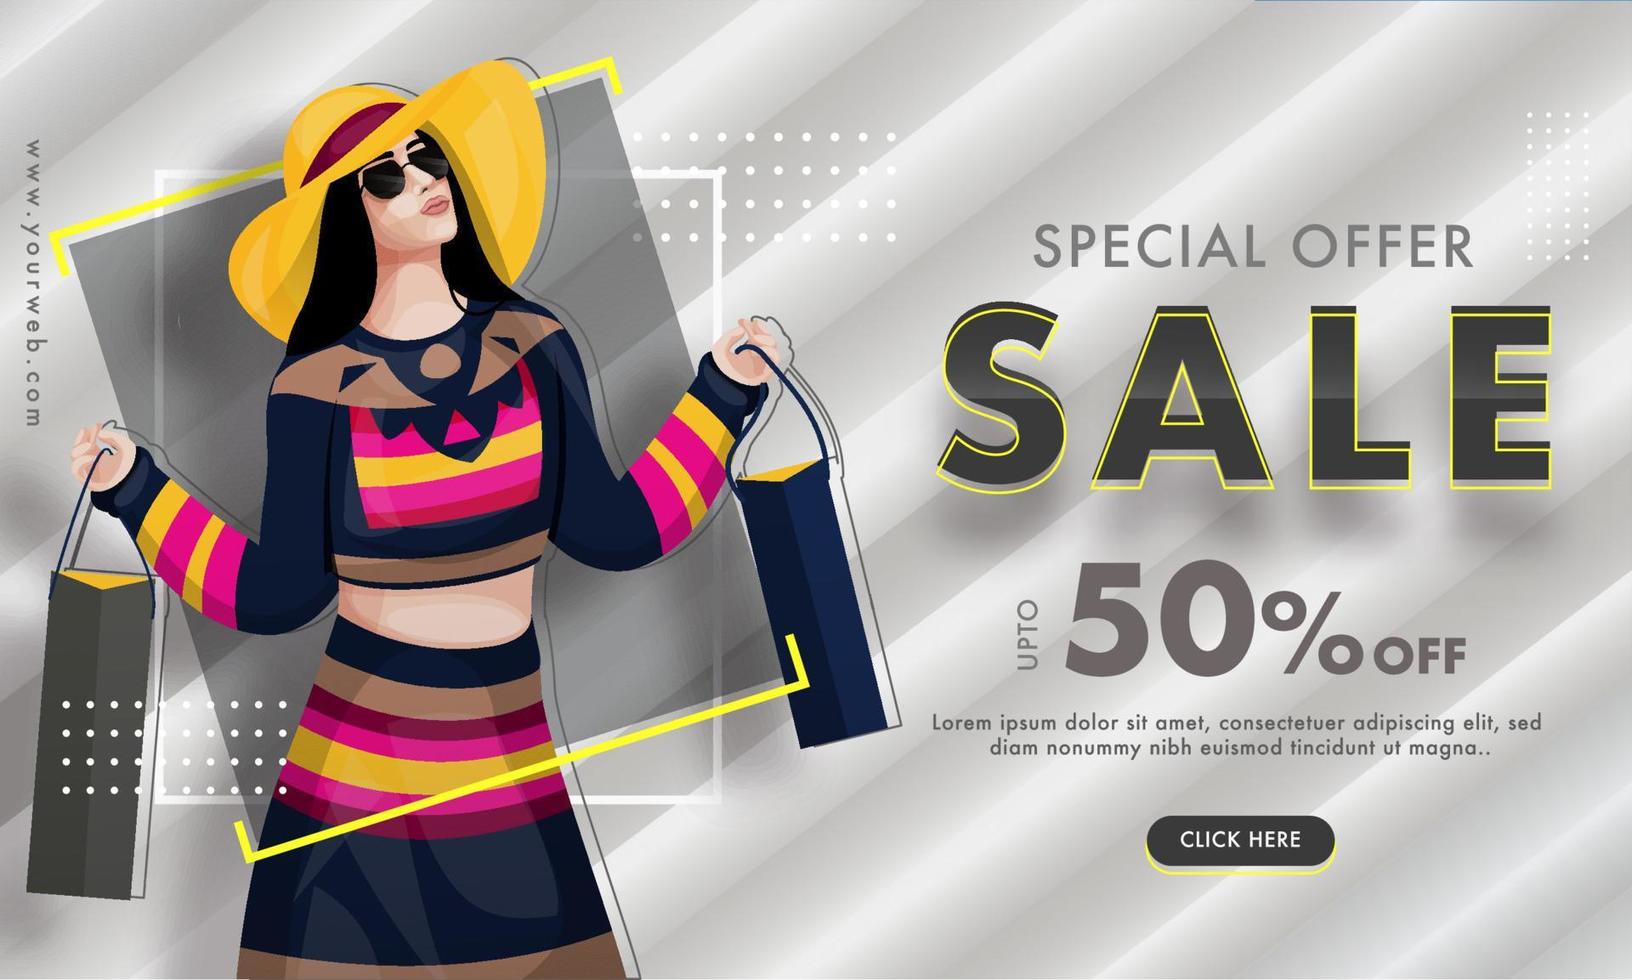 Advertising Sale banner design with discount offer and fashionable woman holding shopping bag on grey striped background for Special Offer. vector